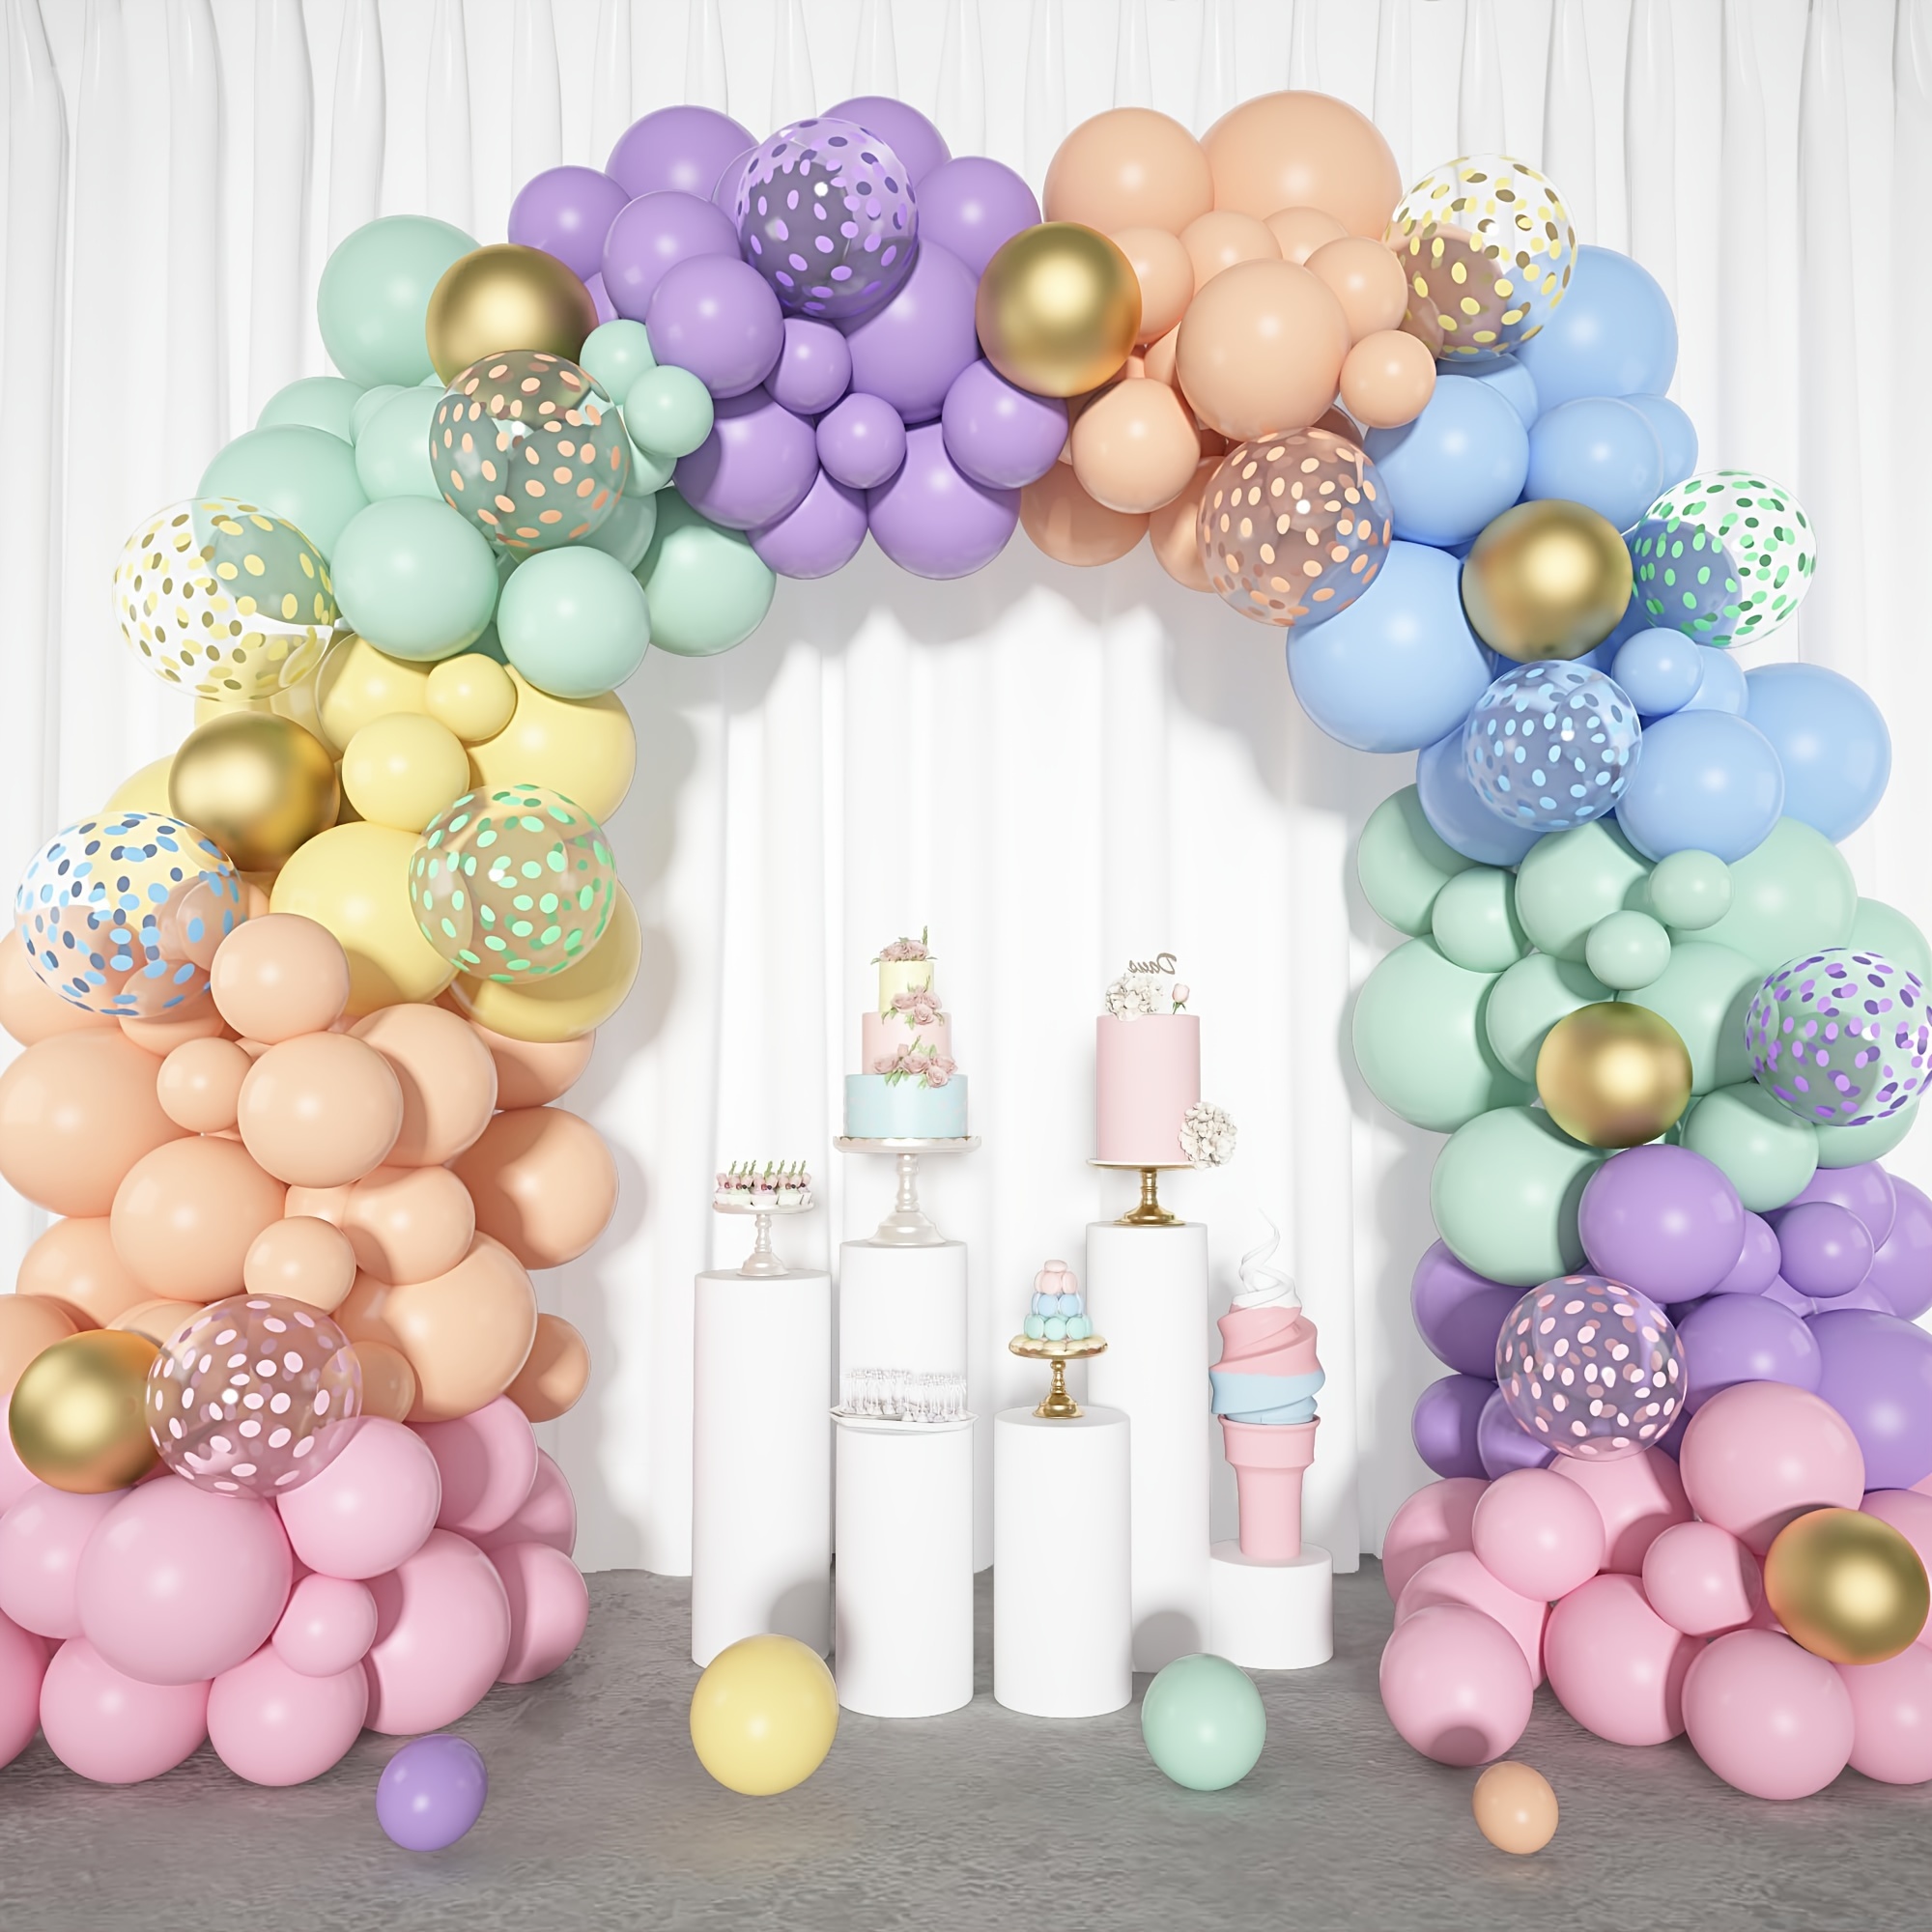 

164pcs Of Pink Balloon Wreath Set, Rainbow Easter Balloon Arch, Colored Gold Balloons Suitable For Pink Easter Shower Wedding Ice Cream Mermaid Party Decoration